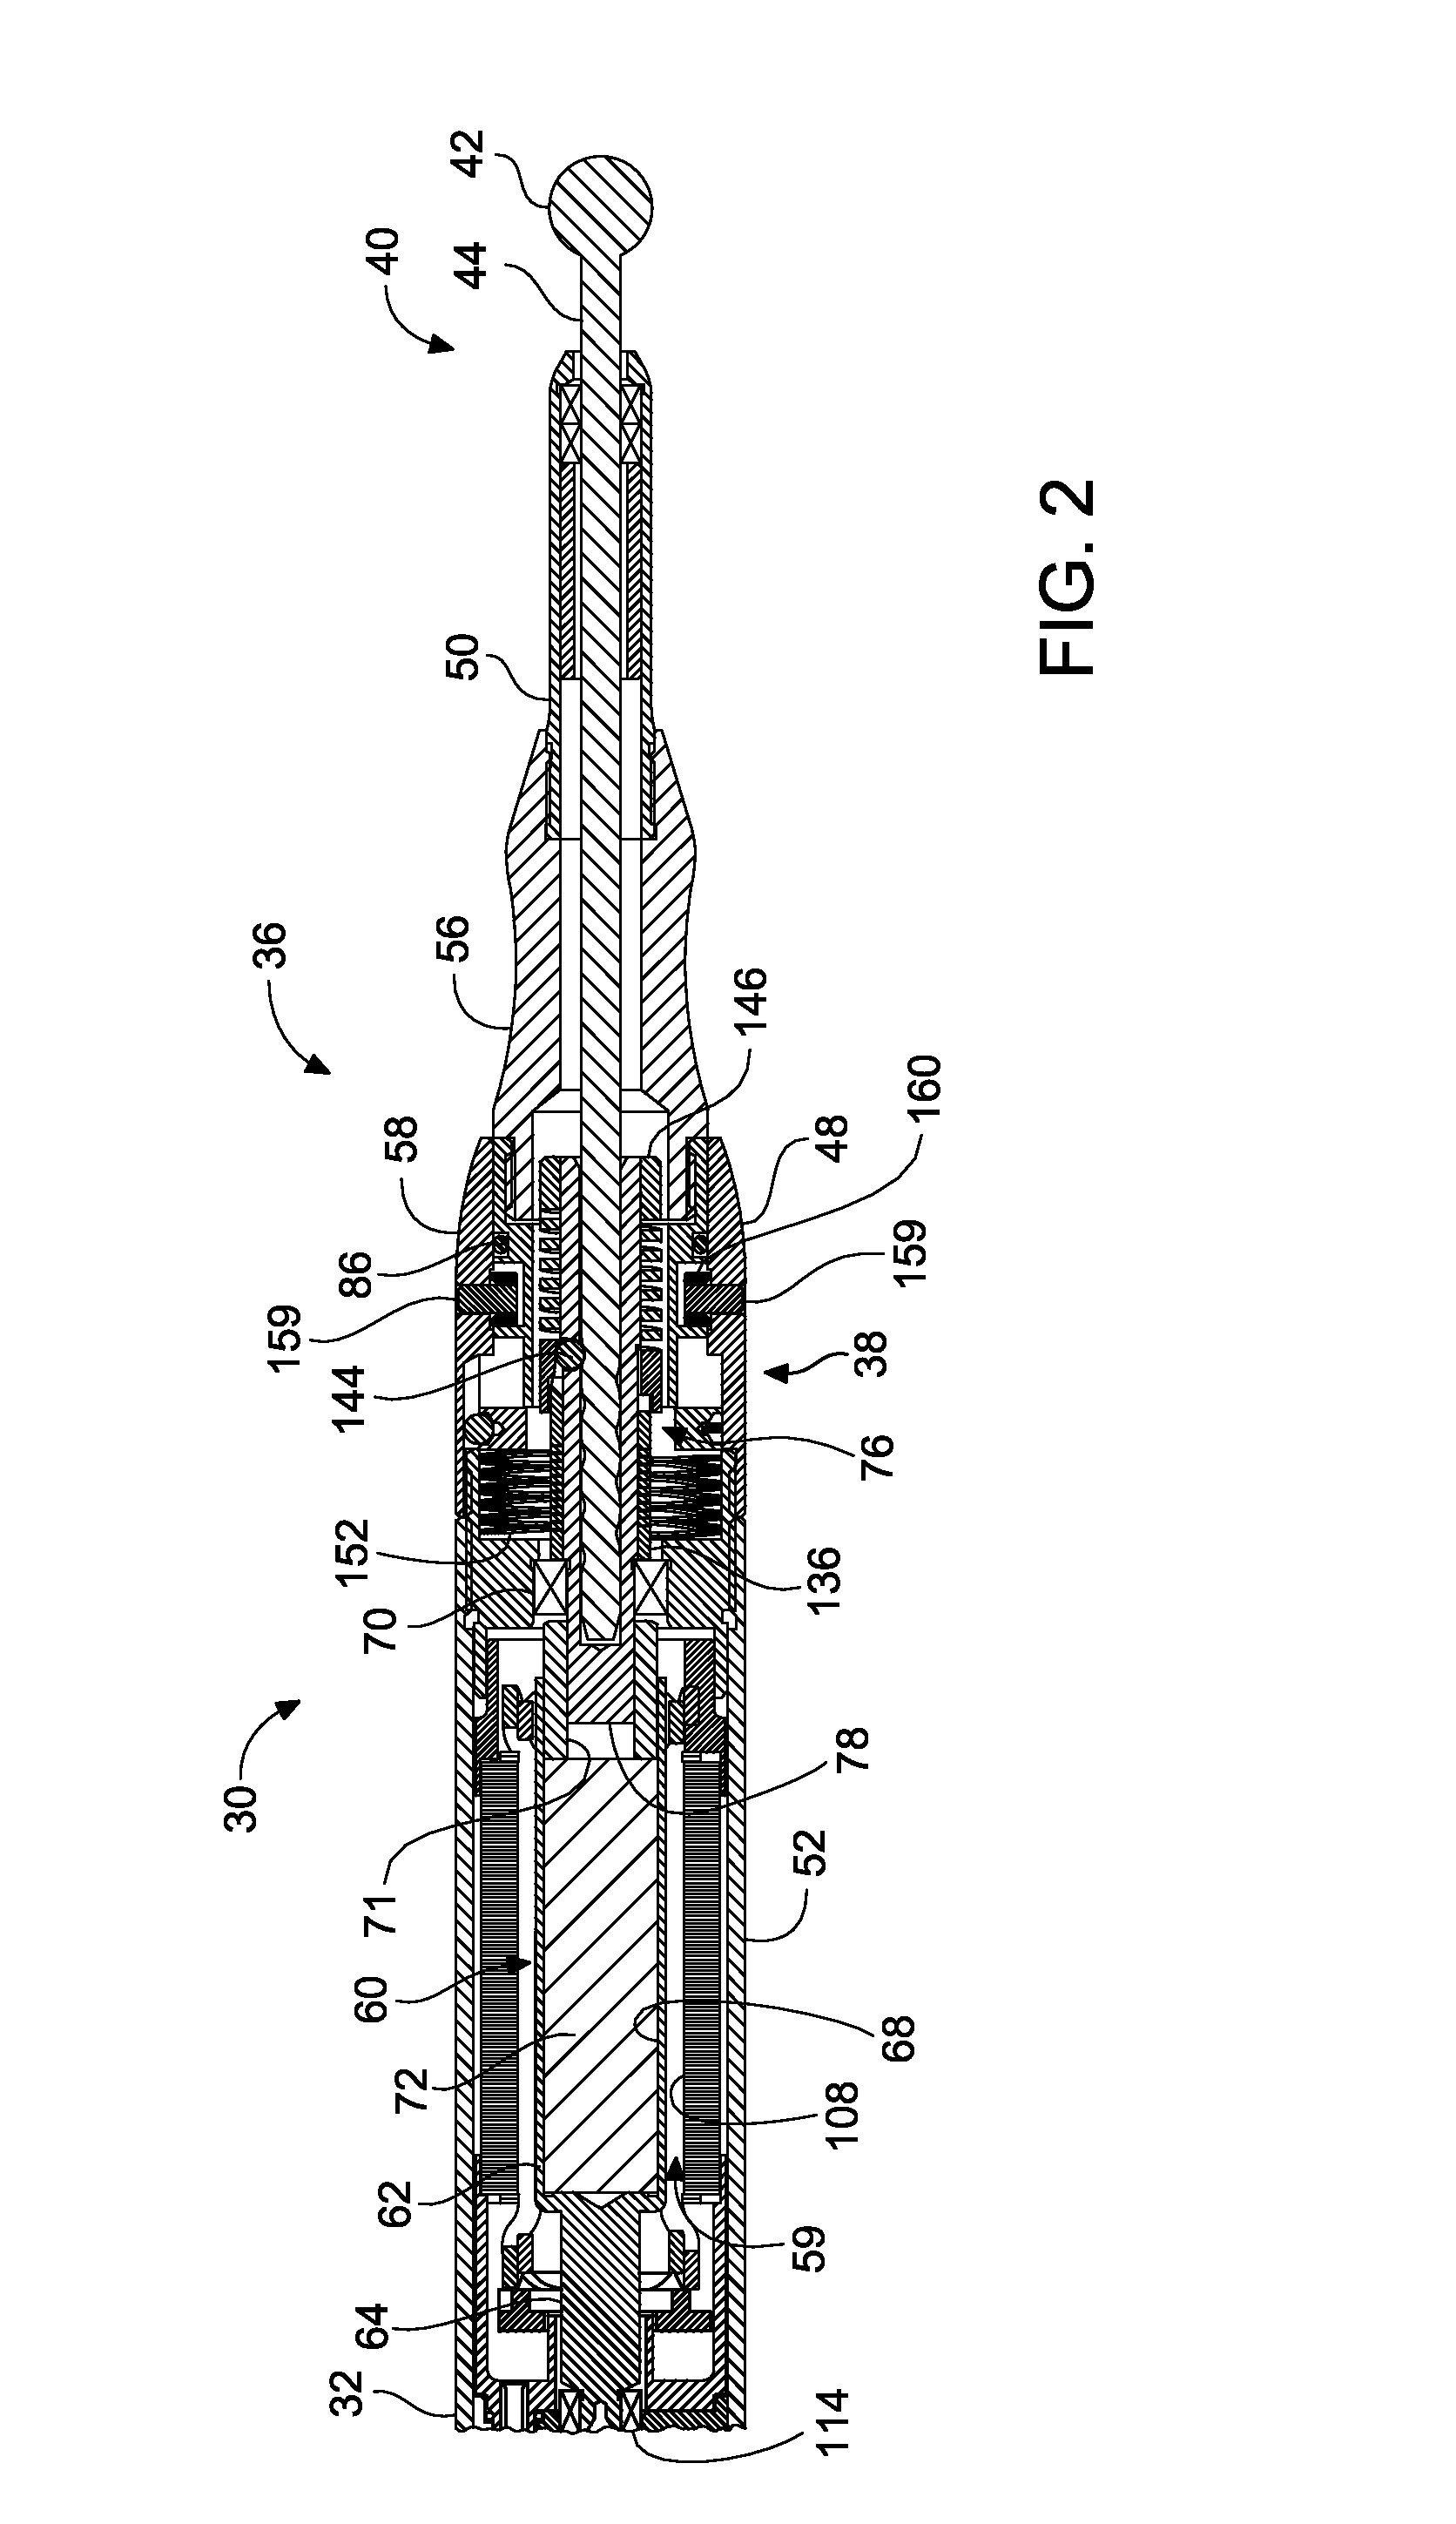 Medical/surgical powered handpiece for rotating the shaft of a accessory, the handpiece having a coupling assembly that facilitates the fine or coarse adjustment of the extension of the accessory shaft